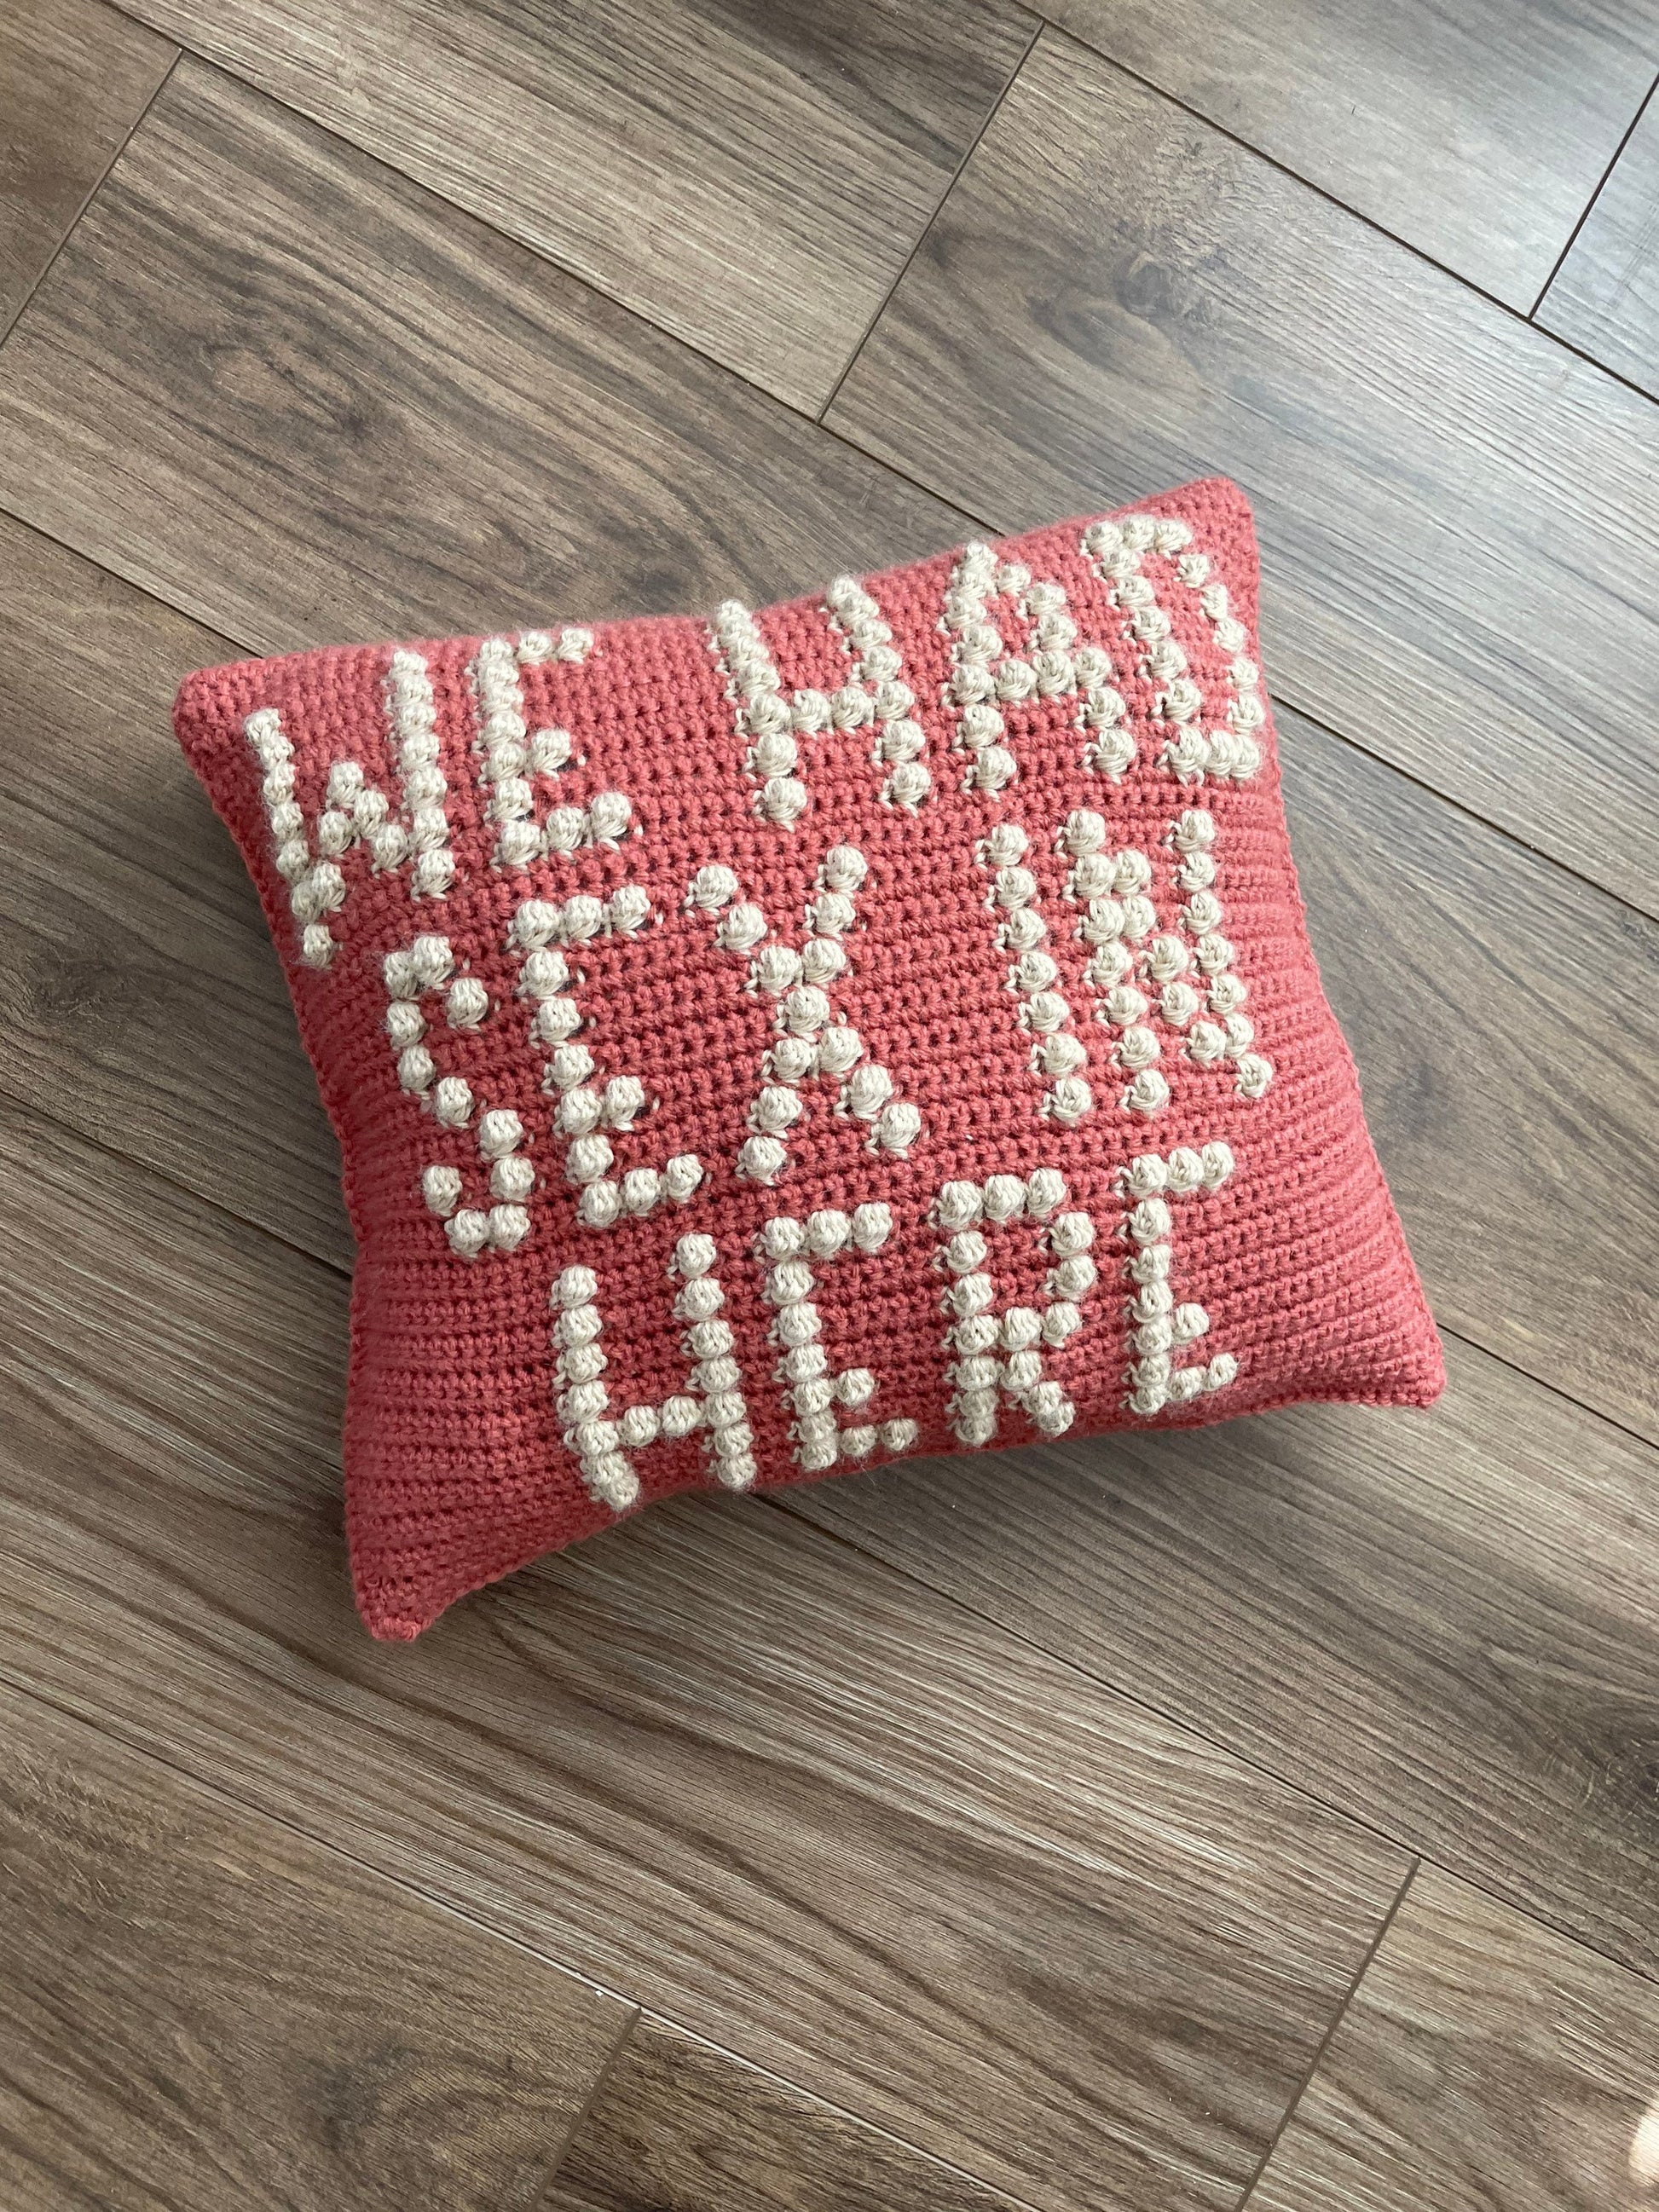 CROCHET PATTERN- We Had Sex in Here Crochet Pillow, Valentine’s Day Pillow